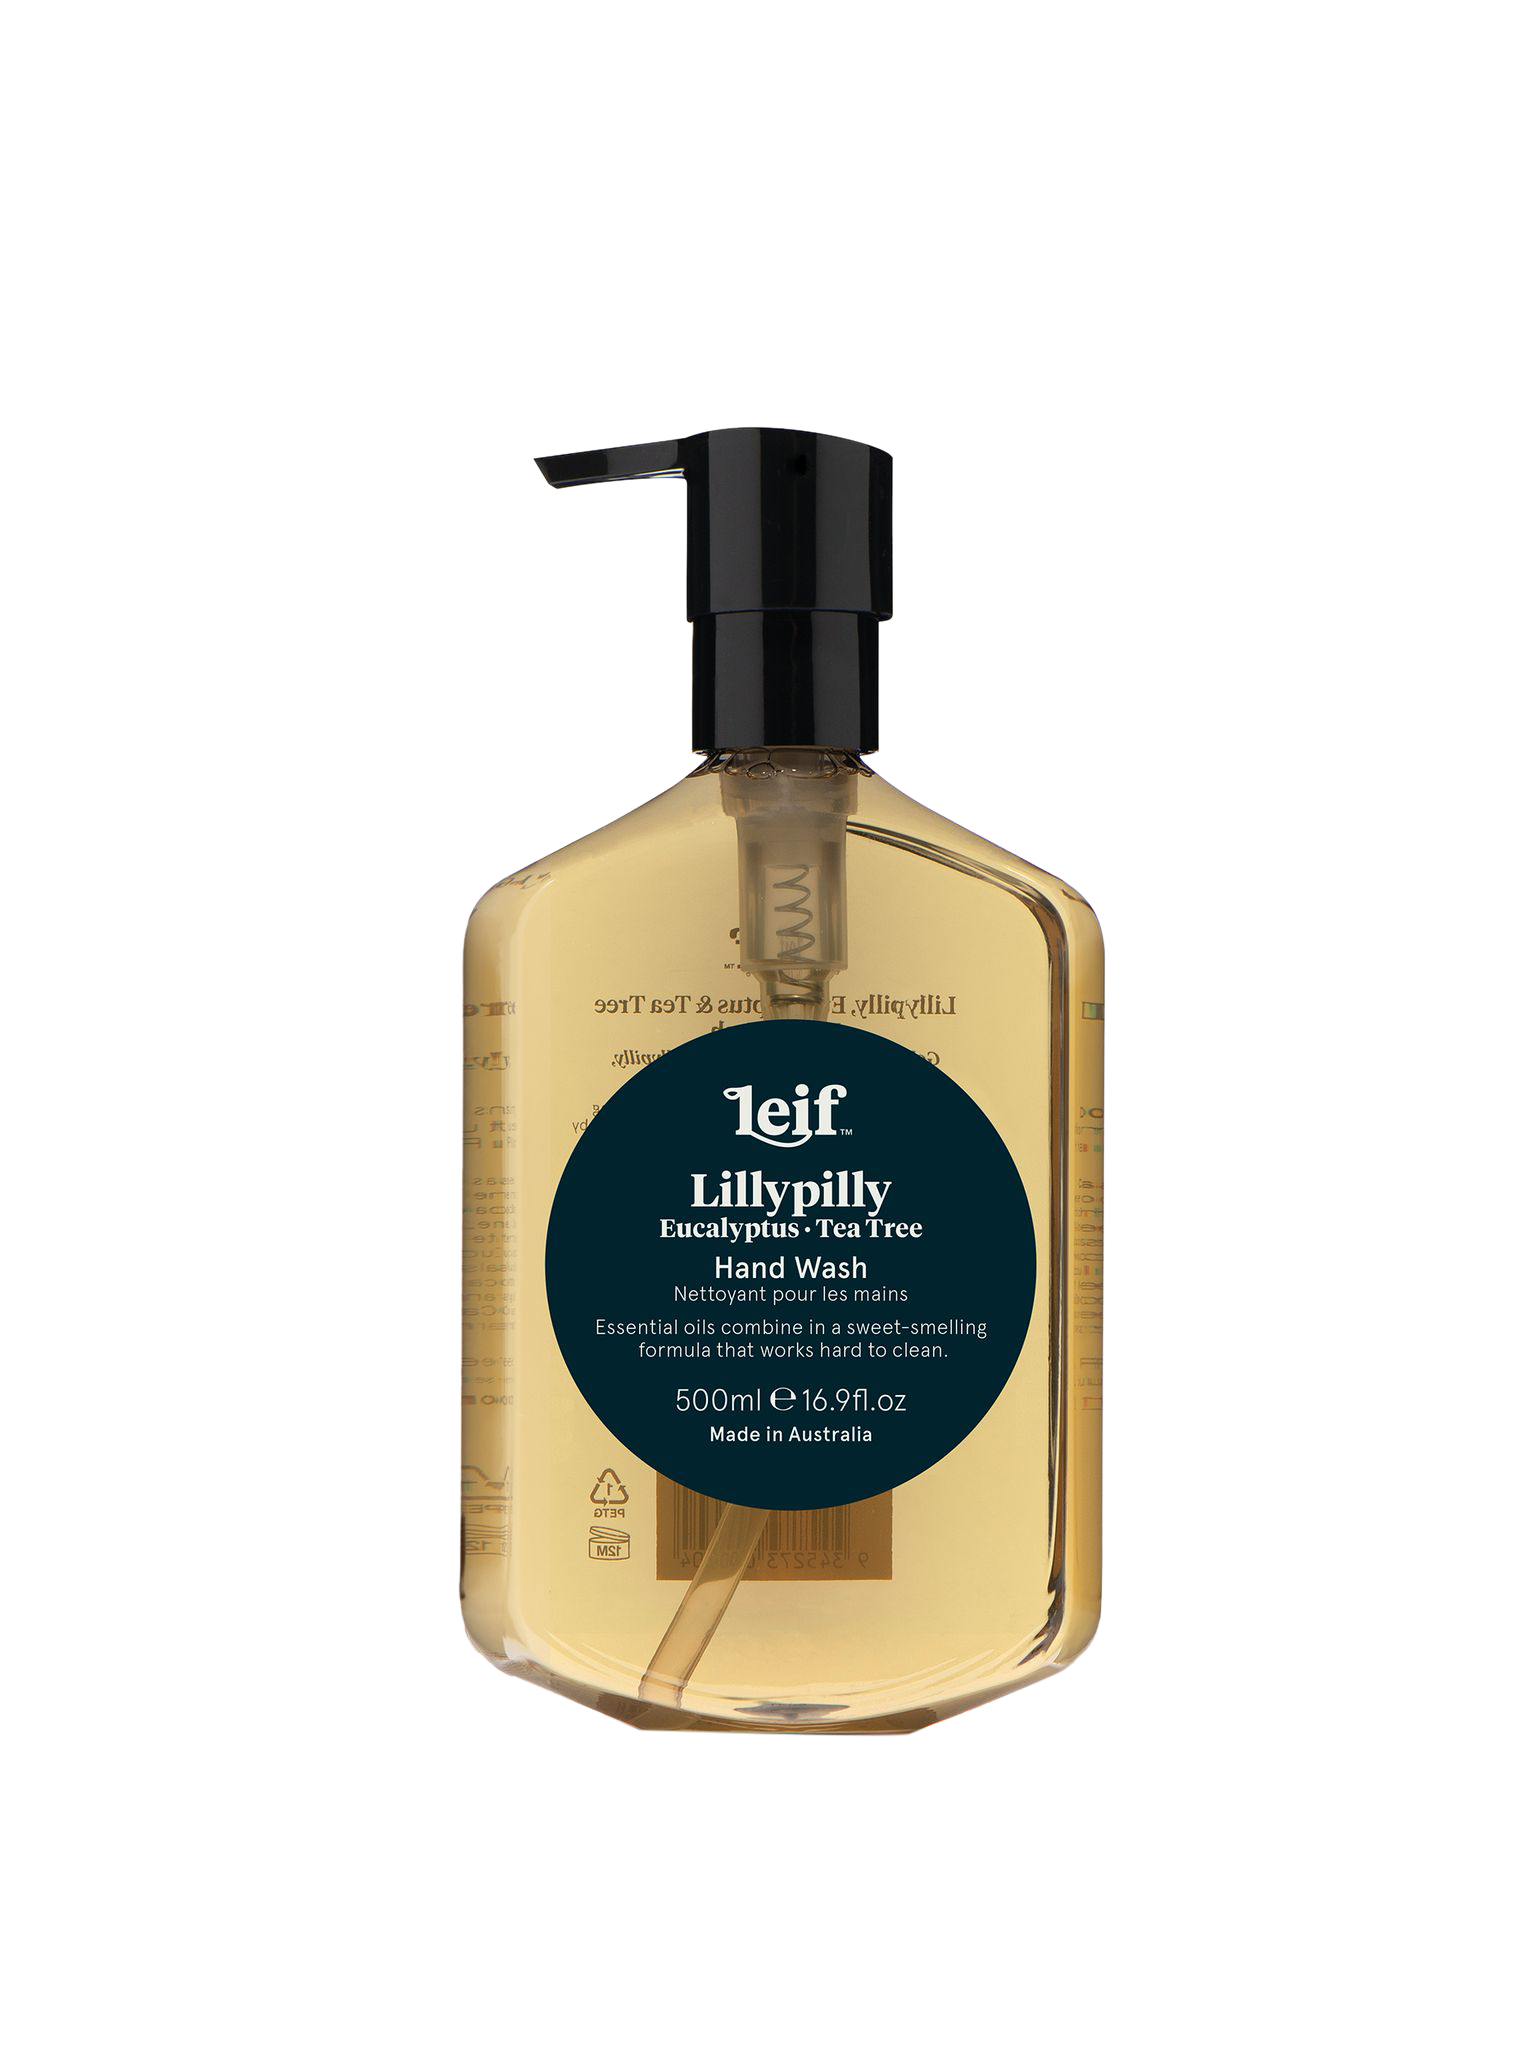 Lillypilly Hand Wash